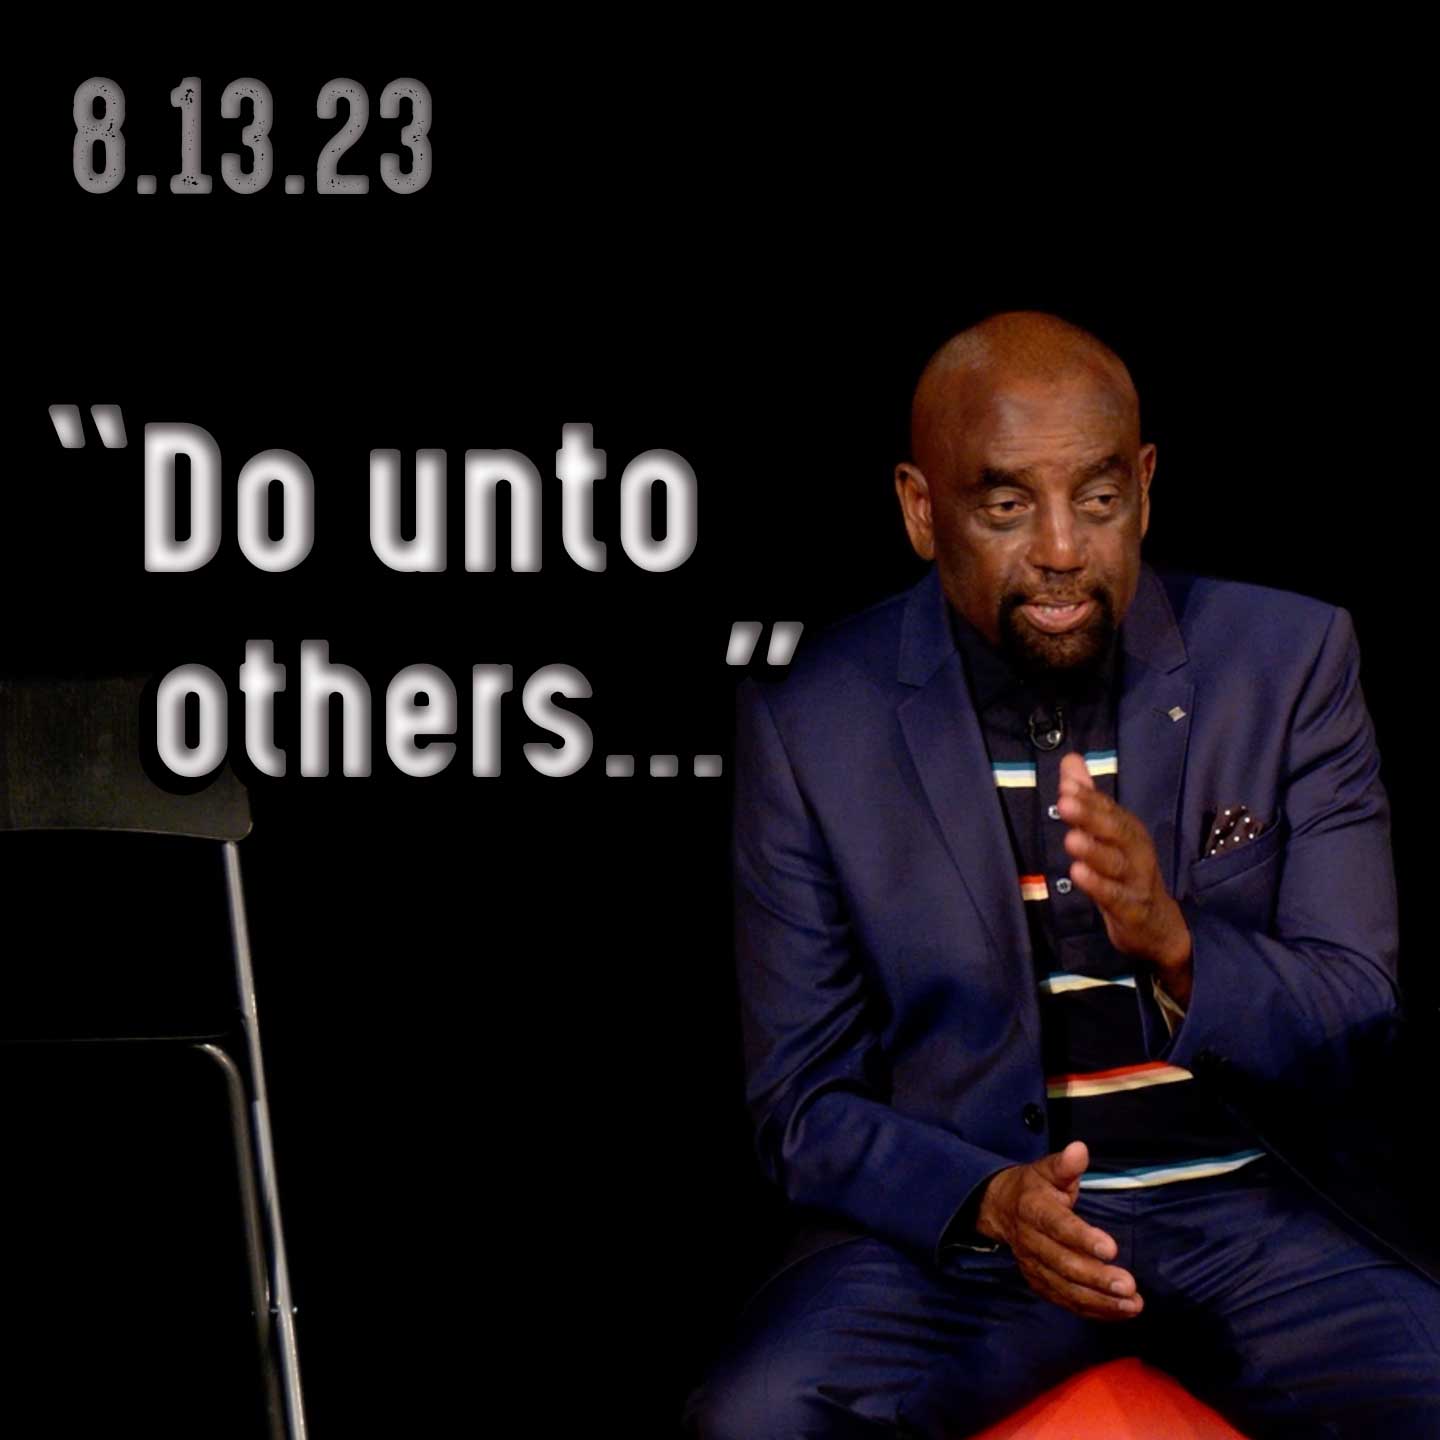 Do You Value Your Feelings? Church 8/13/23 "Do unto others..."